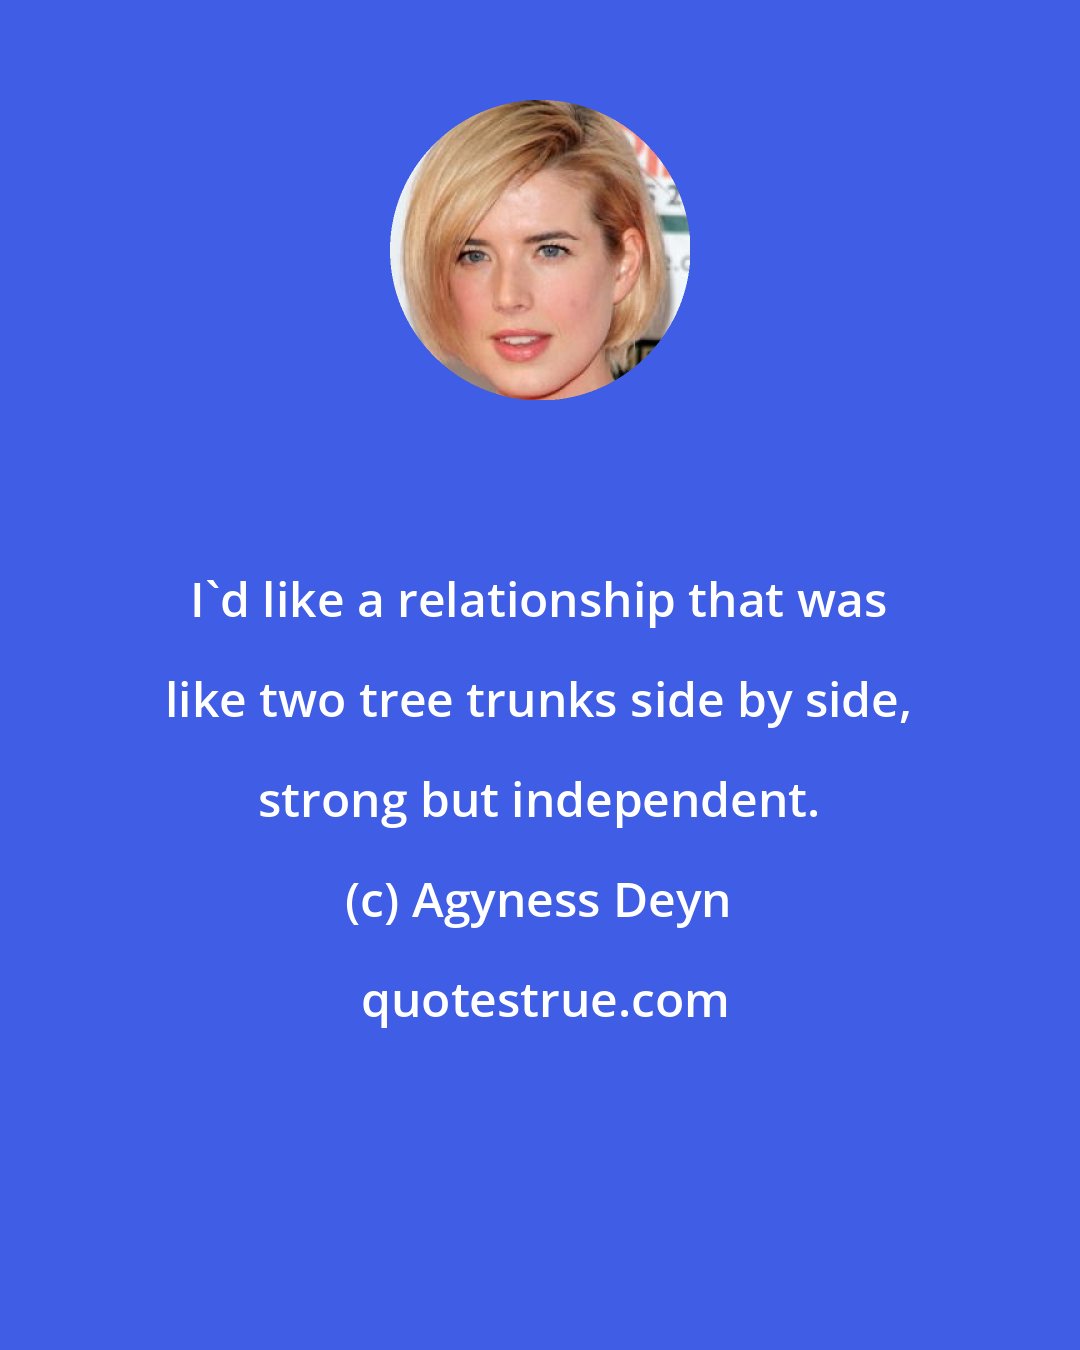 Agyness Deyn: I'd like a relationship that was like two tree trunks side by side, strong but independent.